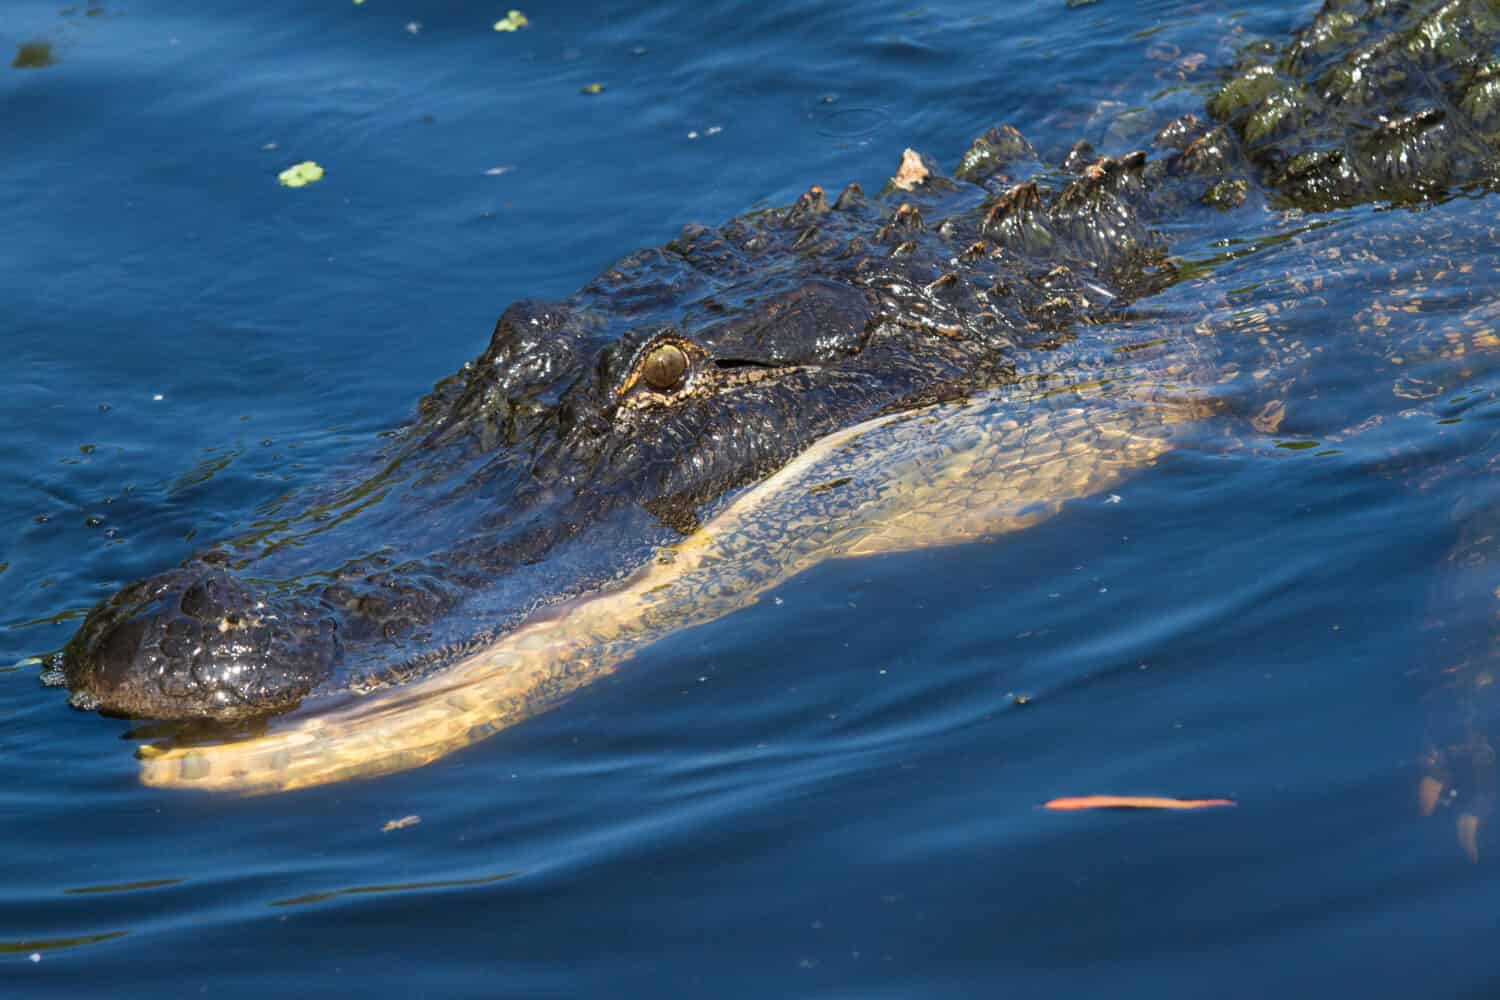 Large american alligator swimming with its mouth open. Shot in Atchafalaya Basin in Southern Louisiana.